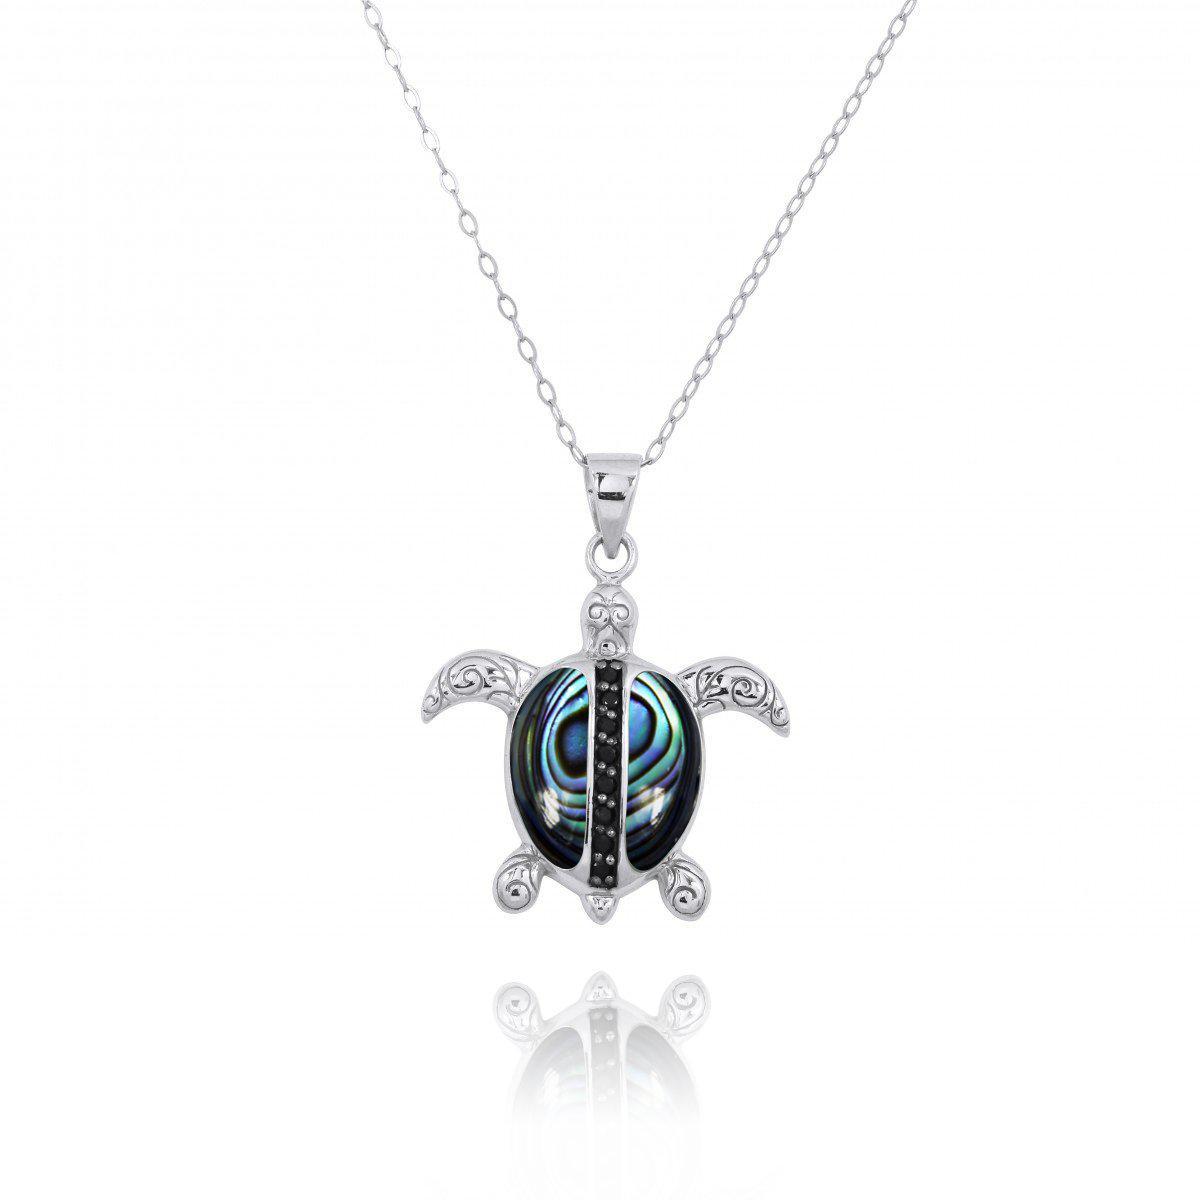 Turtle Pendant Necklace with Abalone Shell and Black Spinel